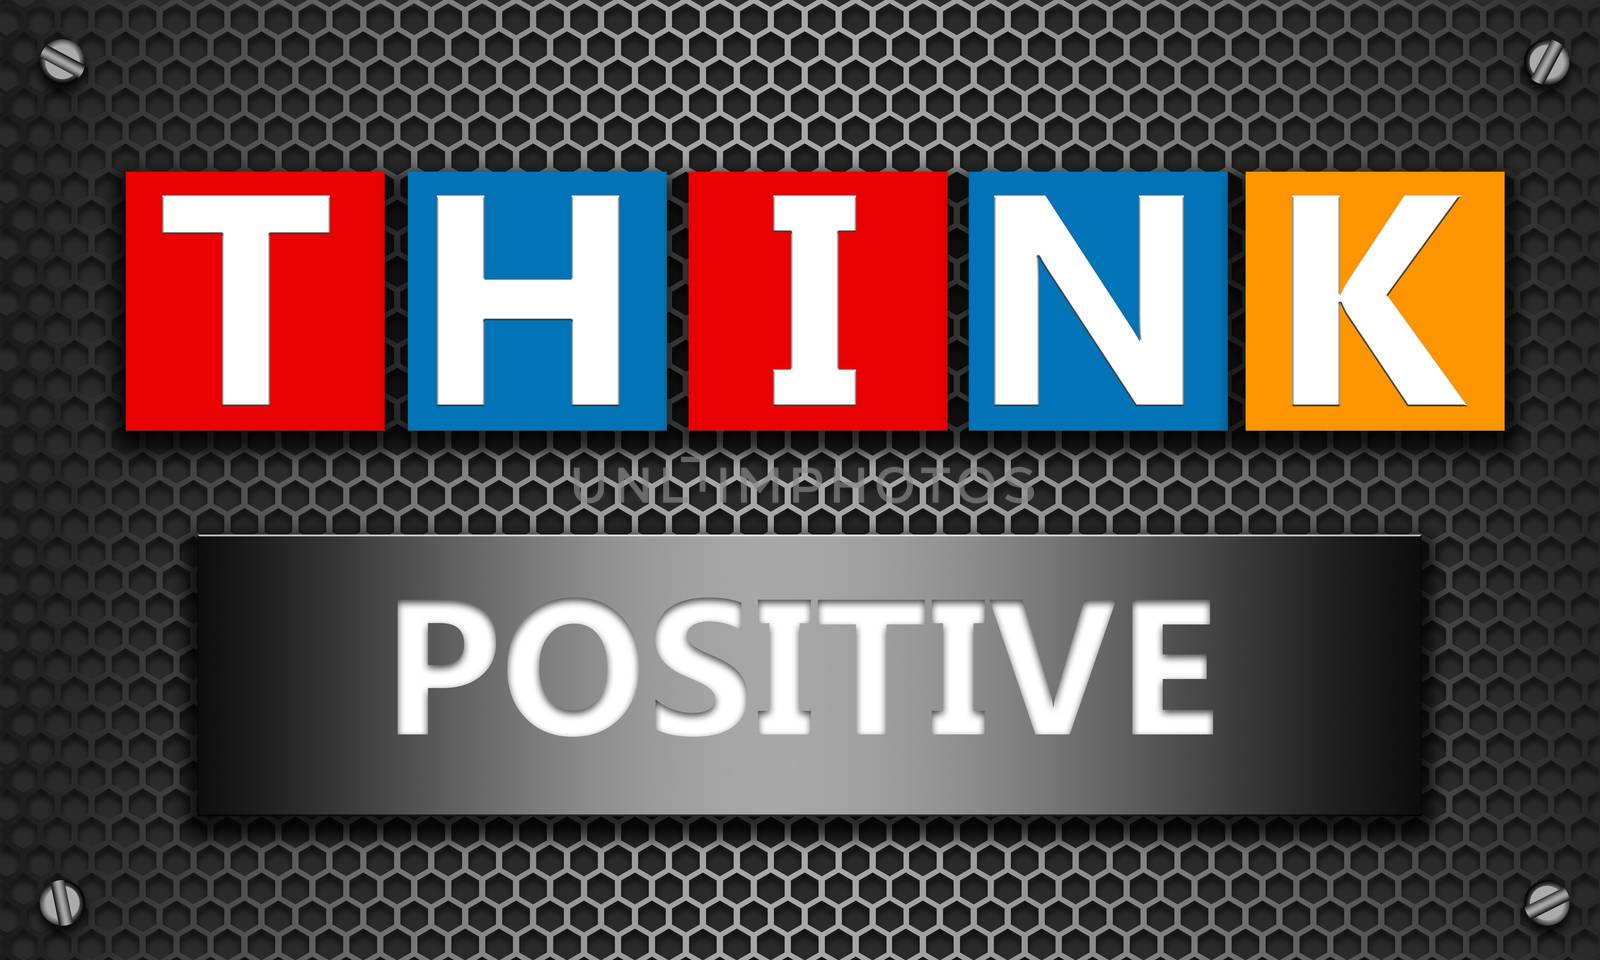 Think positive concept on mesh hexagon background by tang90246